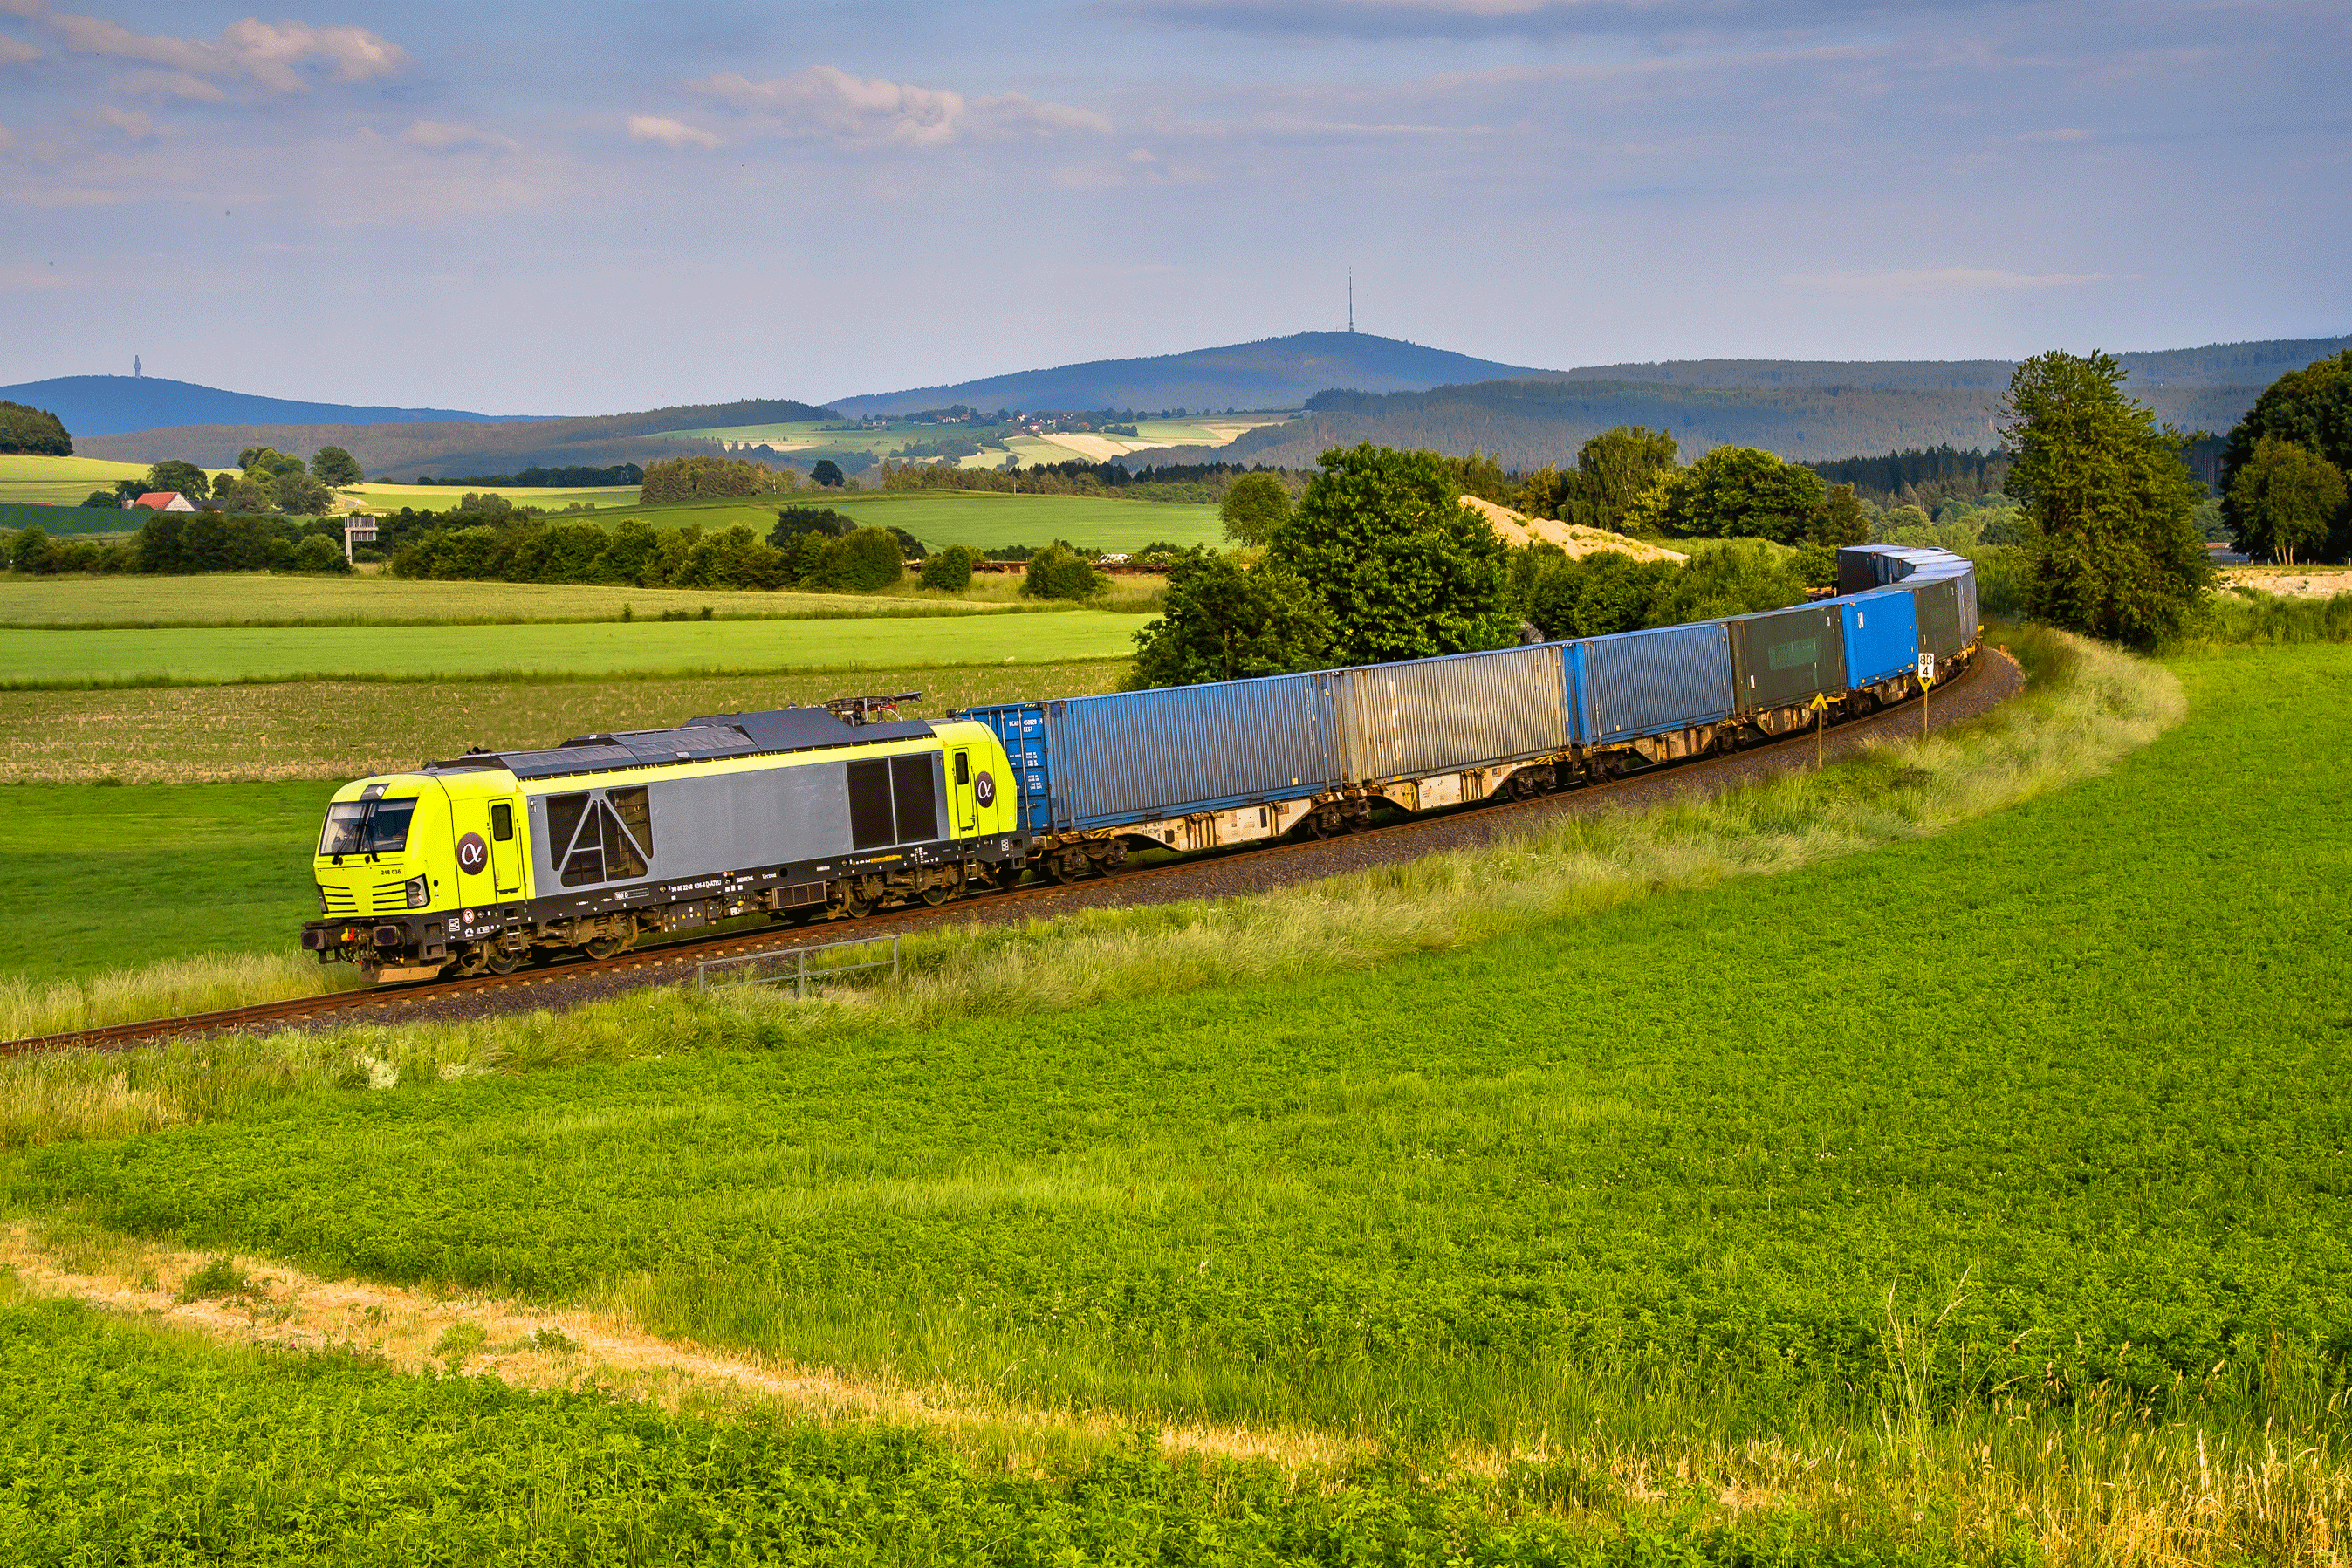 A Siemens Vectron locomotive owned by Alpha Trains hauling freight